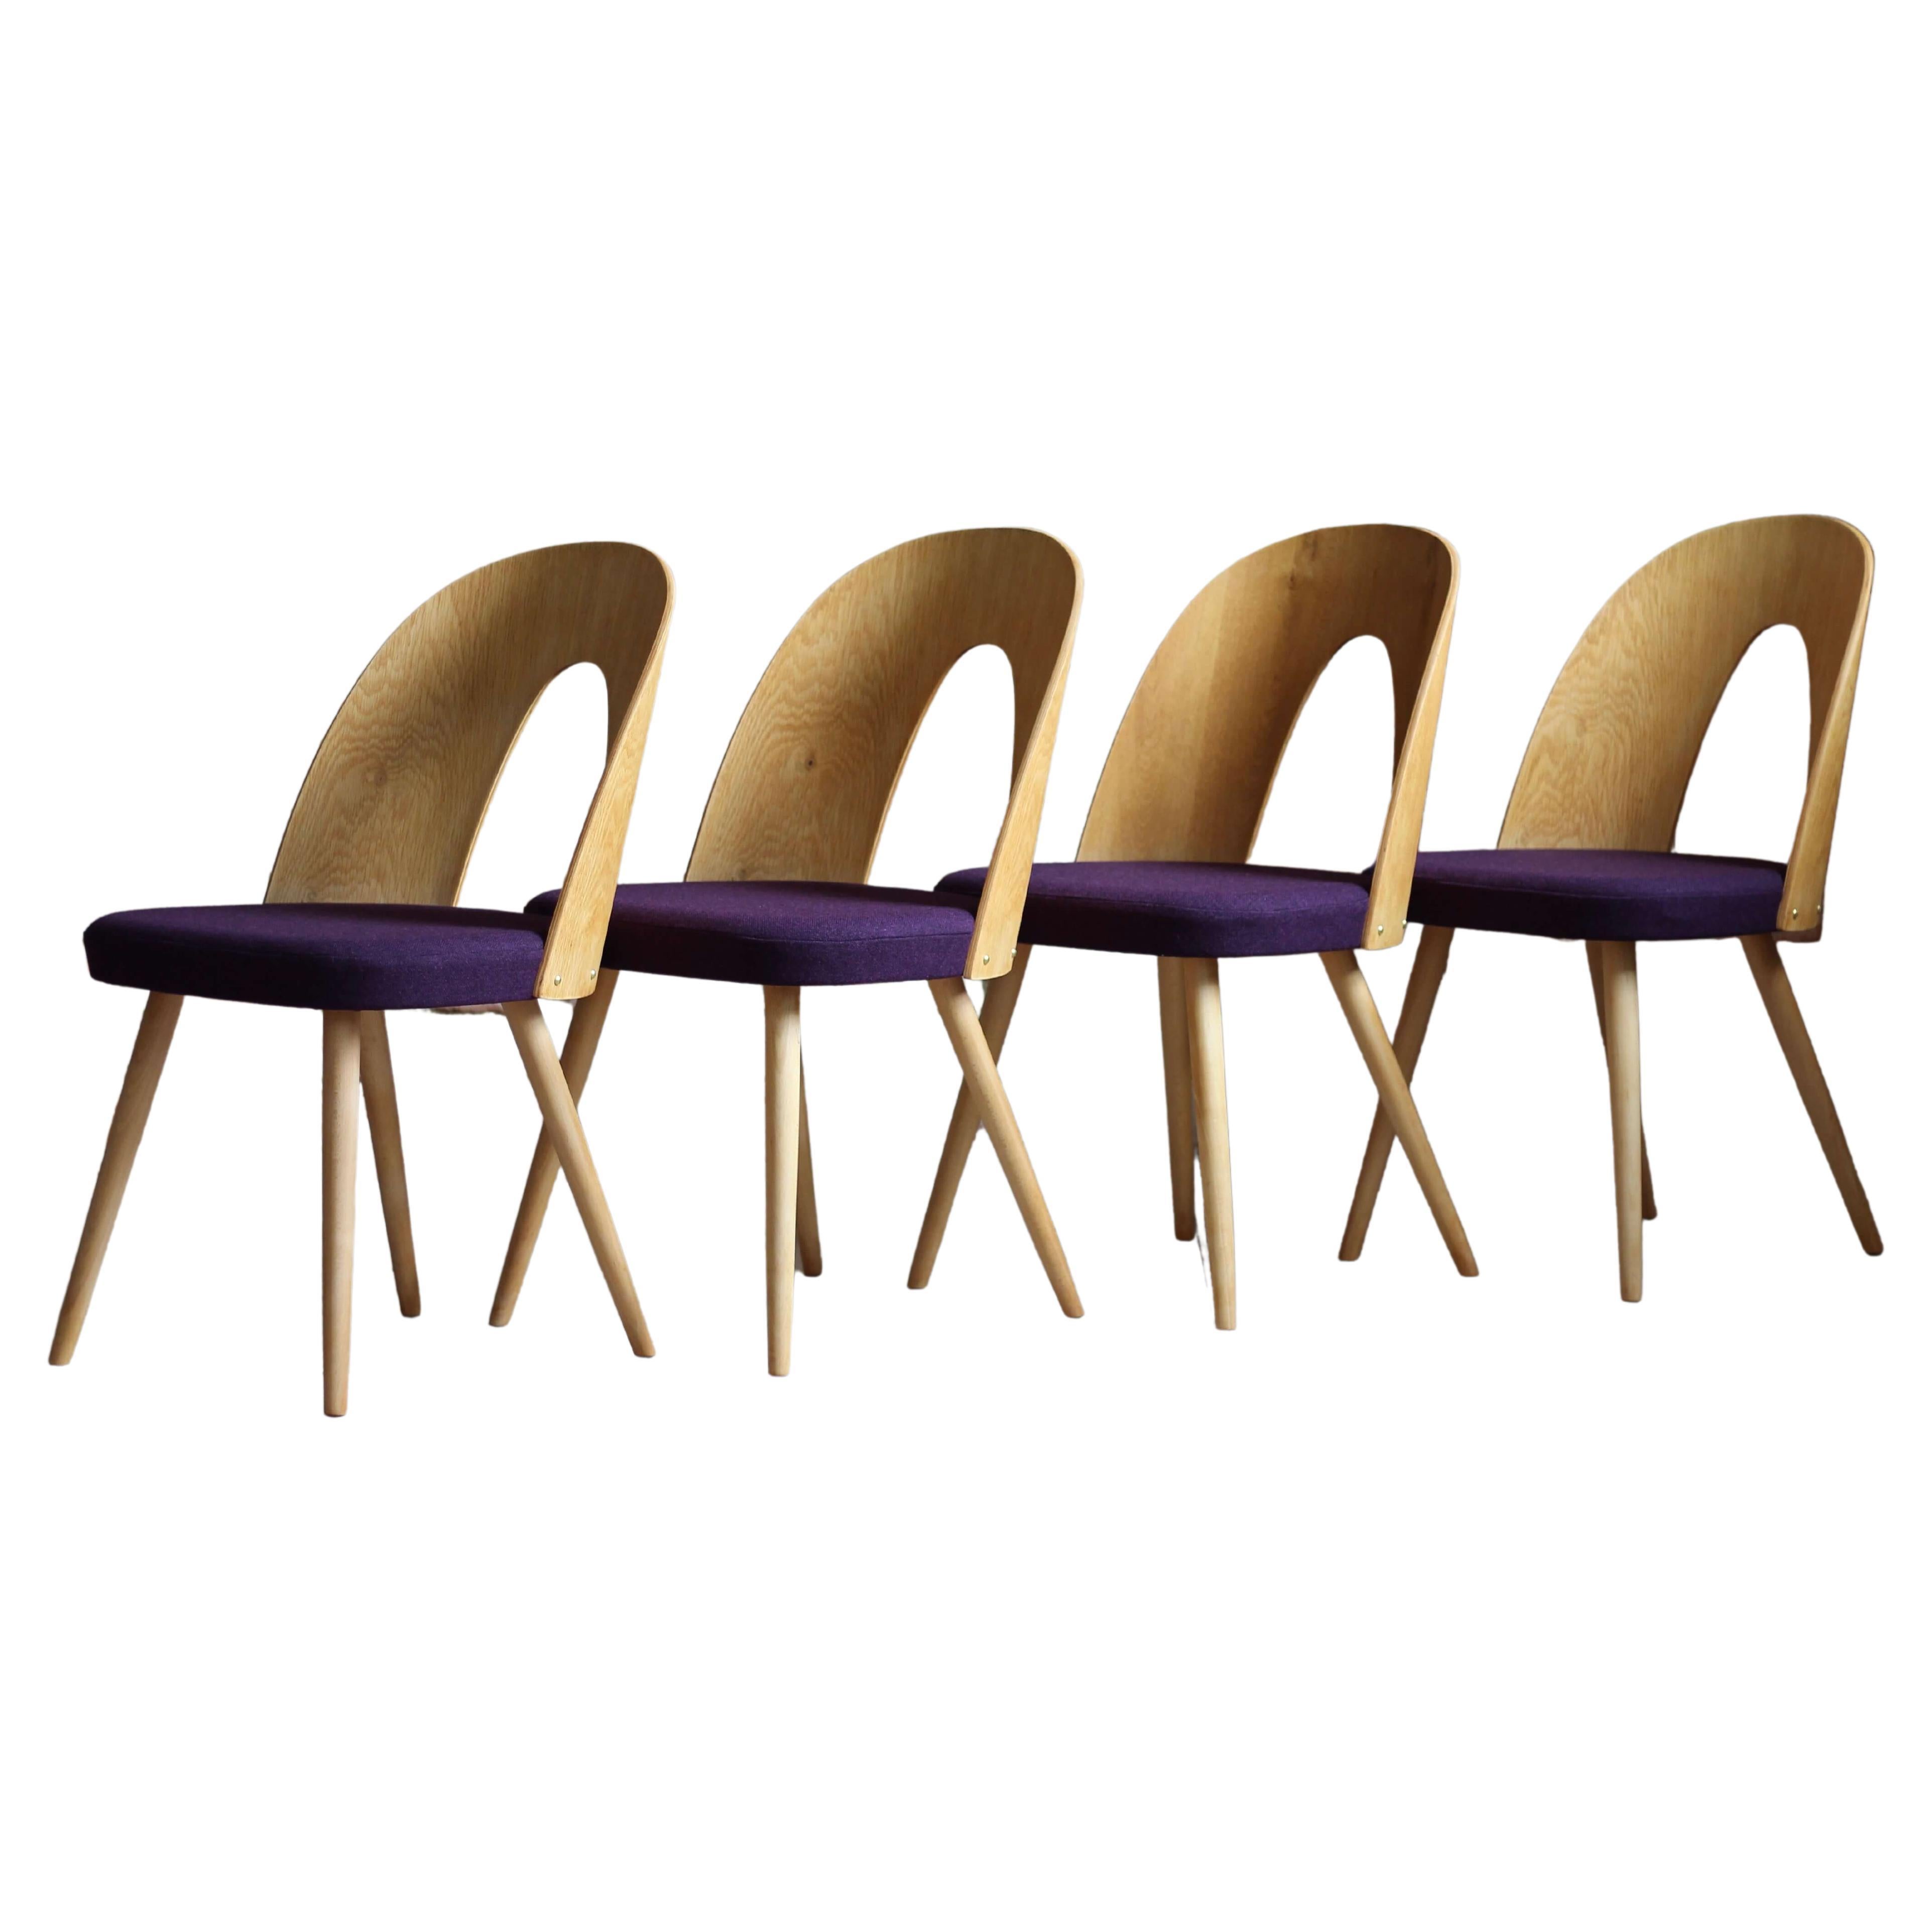 Set of 4 MidCentury Dining Chairs by A.Šuman, Customizable Upholstery Available